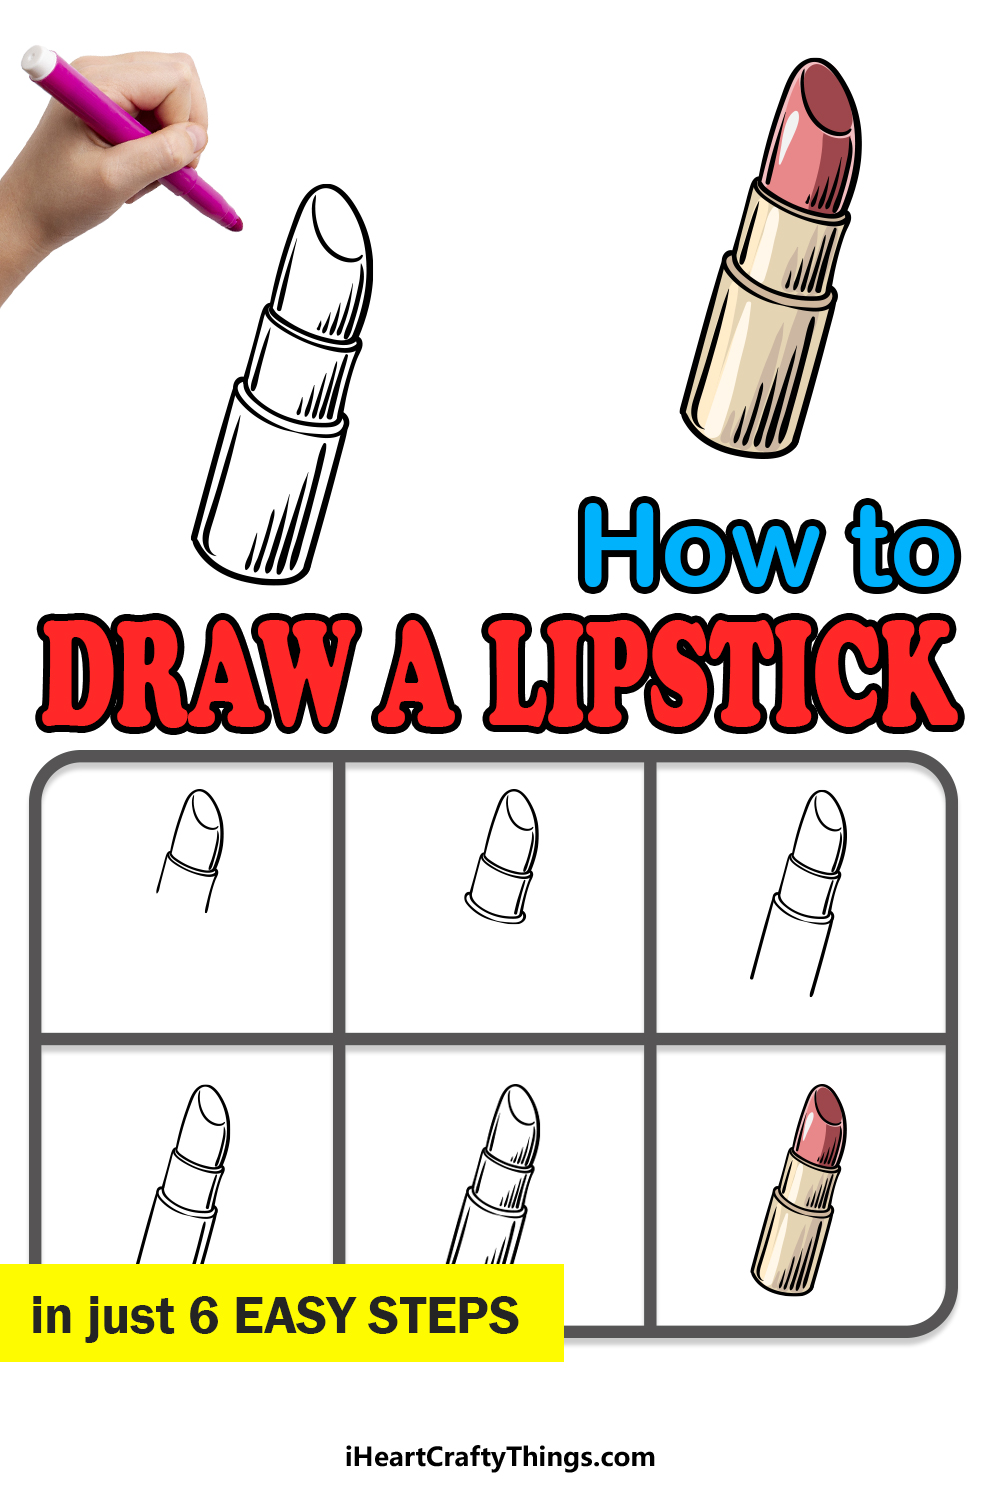 how to draw a lipstick in 6 easy steps